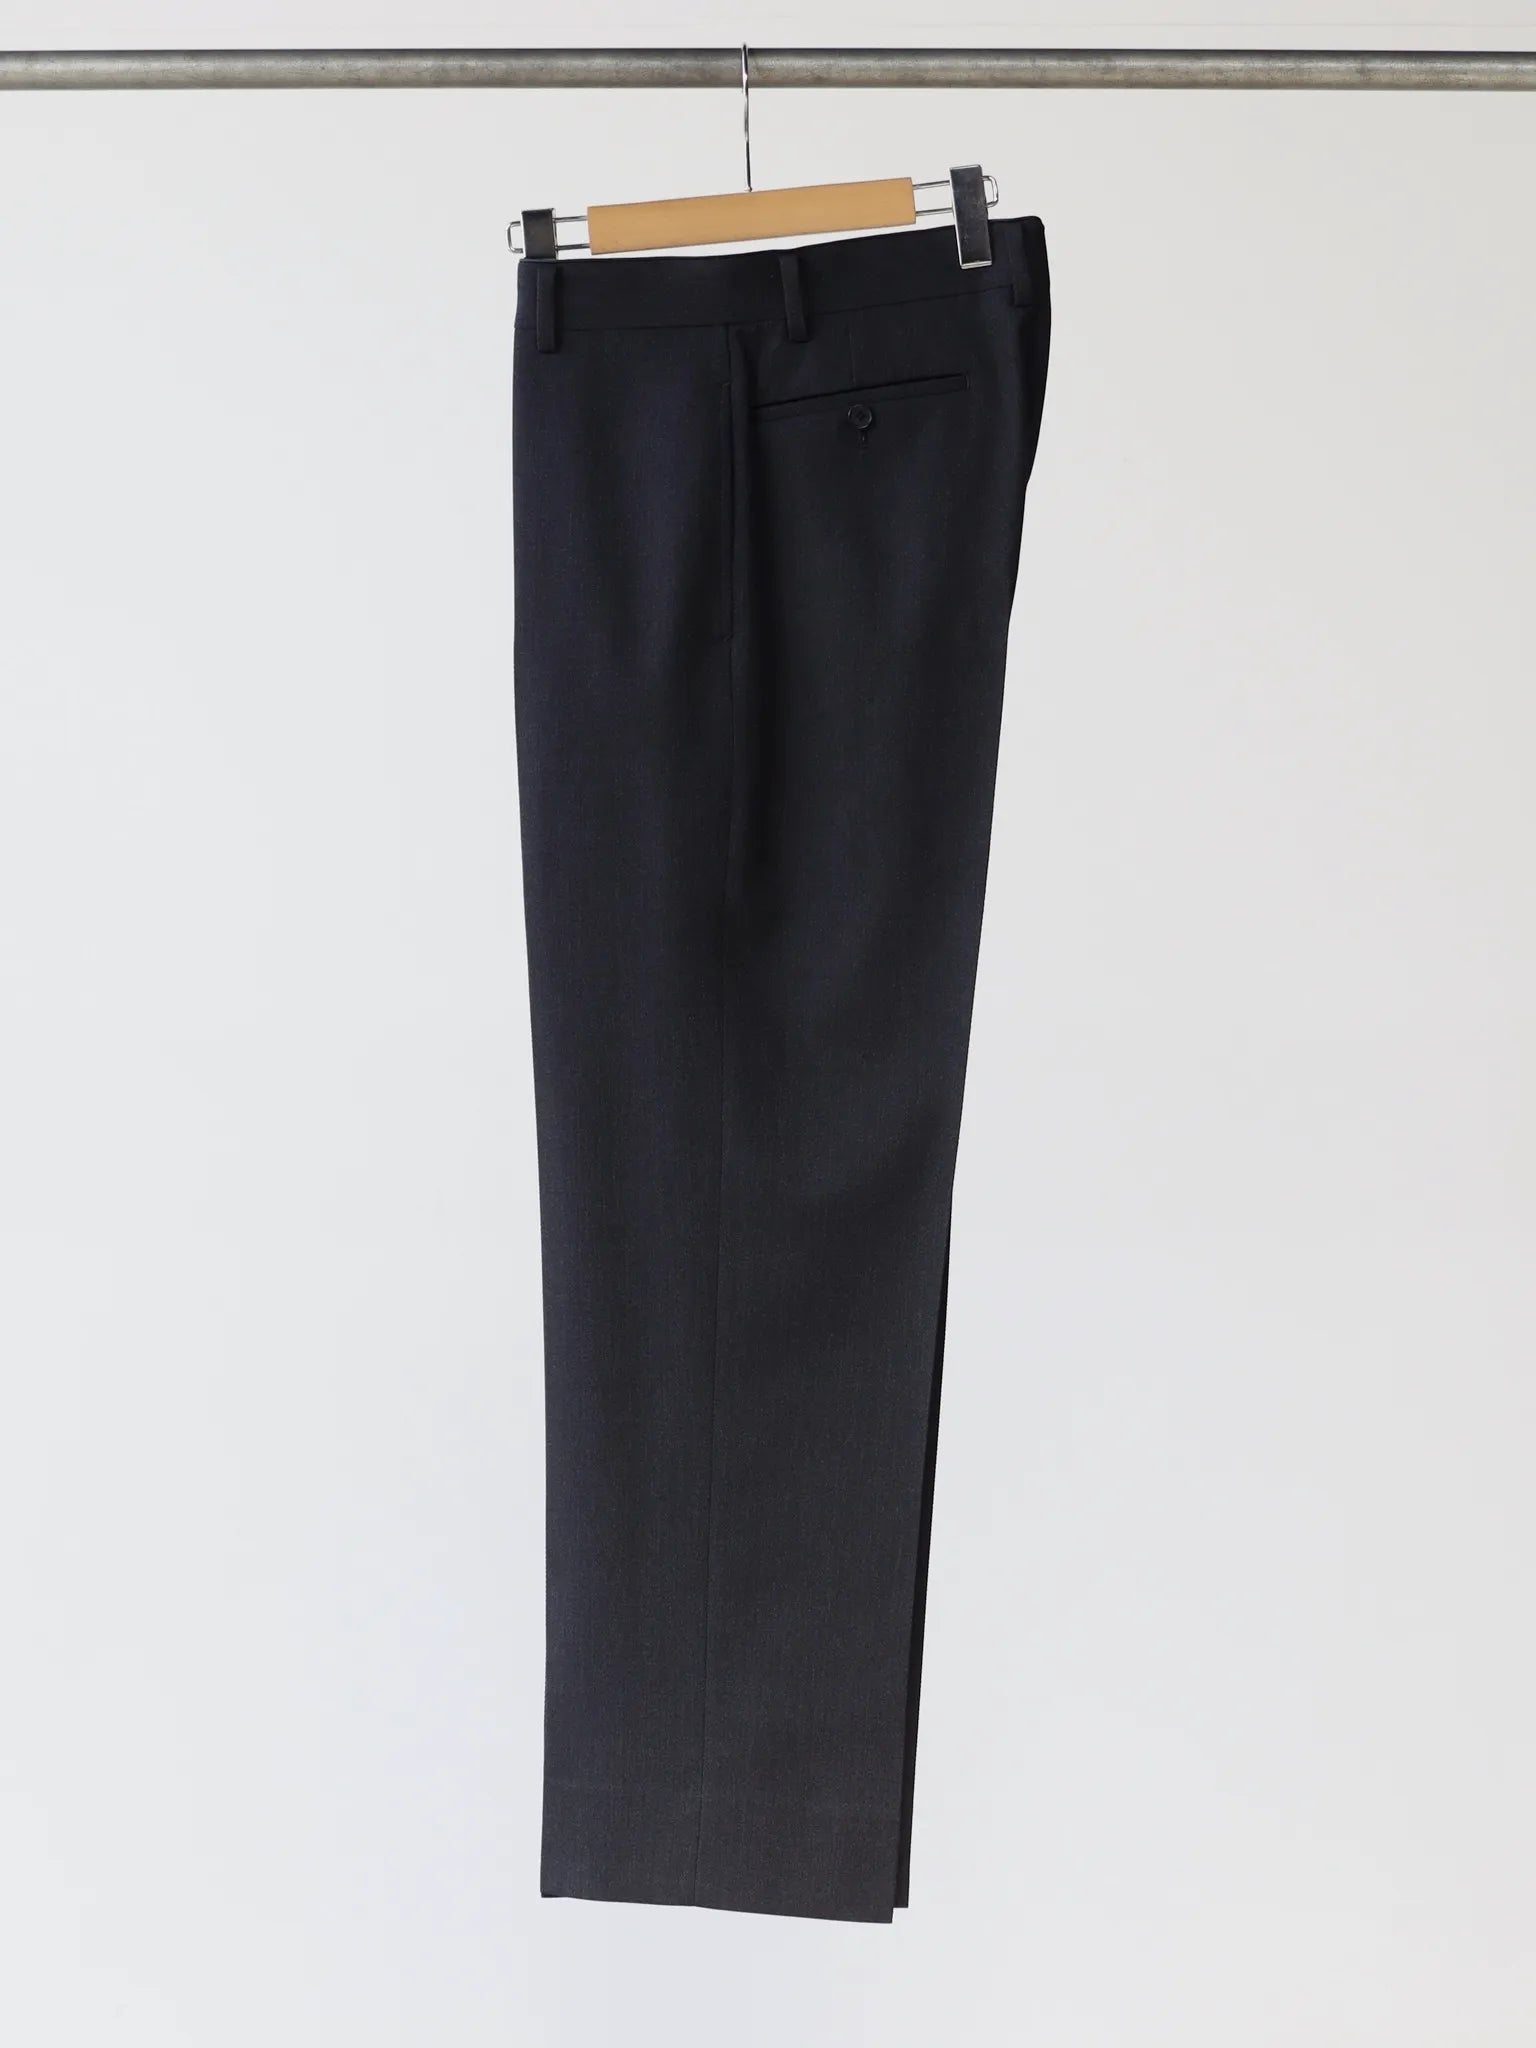 a-presse-covert-cloth-trousers-charcoal-6